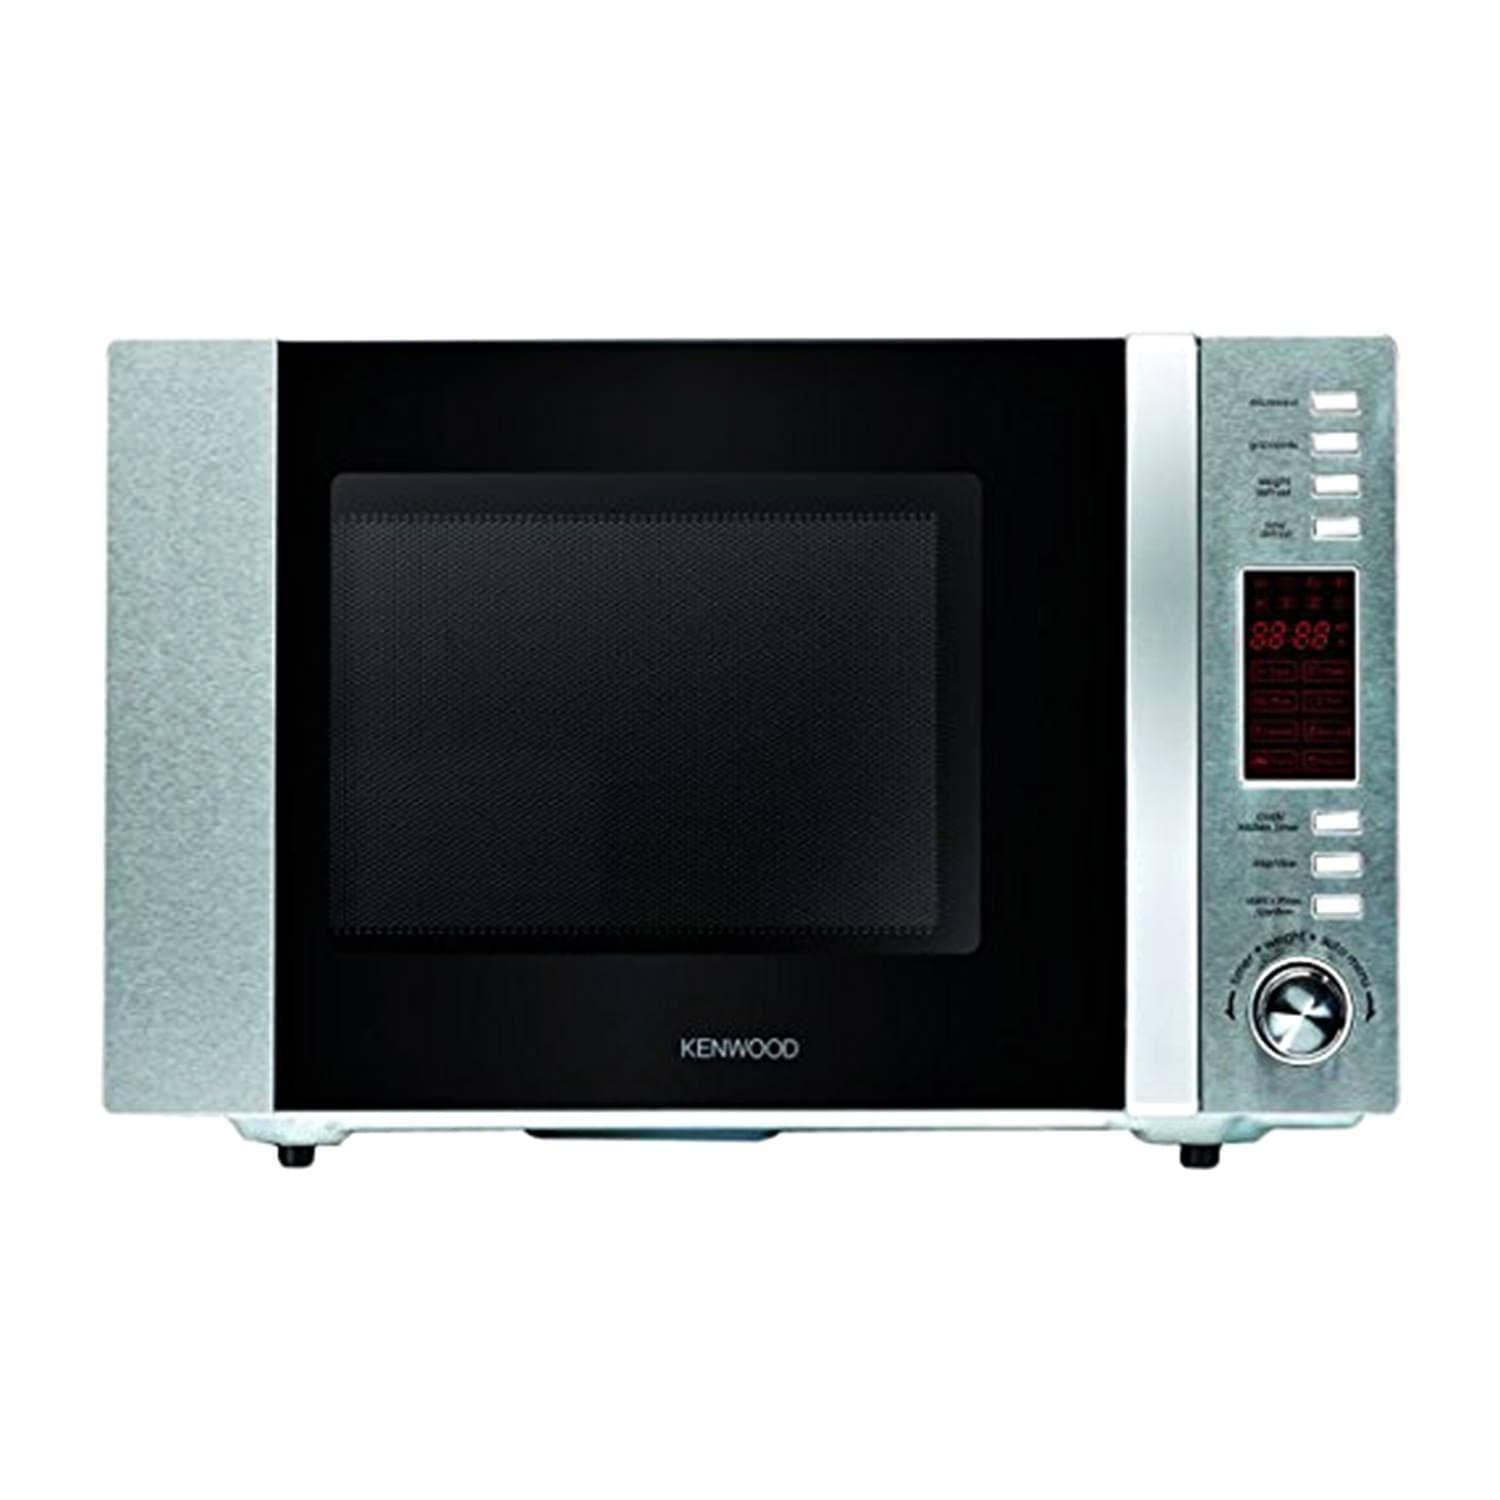 Kenwood 30 Litres Grill Microwave - MWL311 - Jashanmal Home